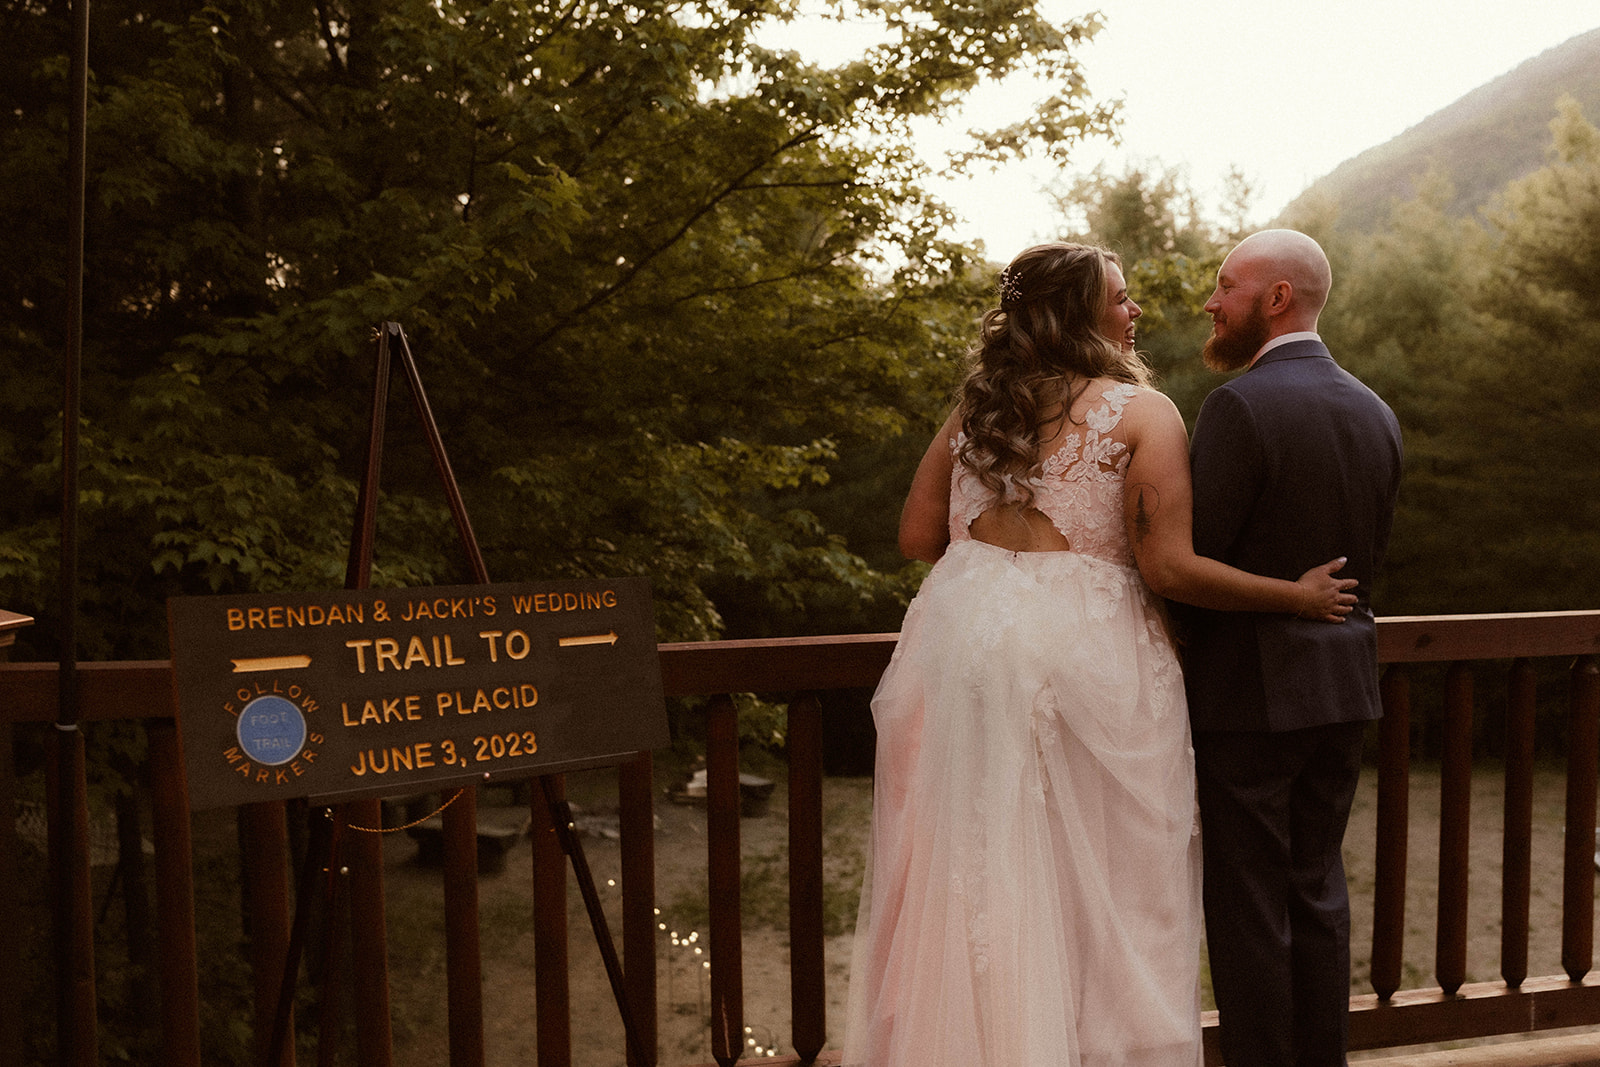 Beautiful bride and groom share a moment overlooking the majestic Adirondack mountain range